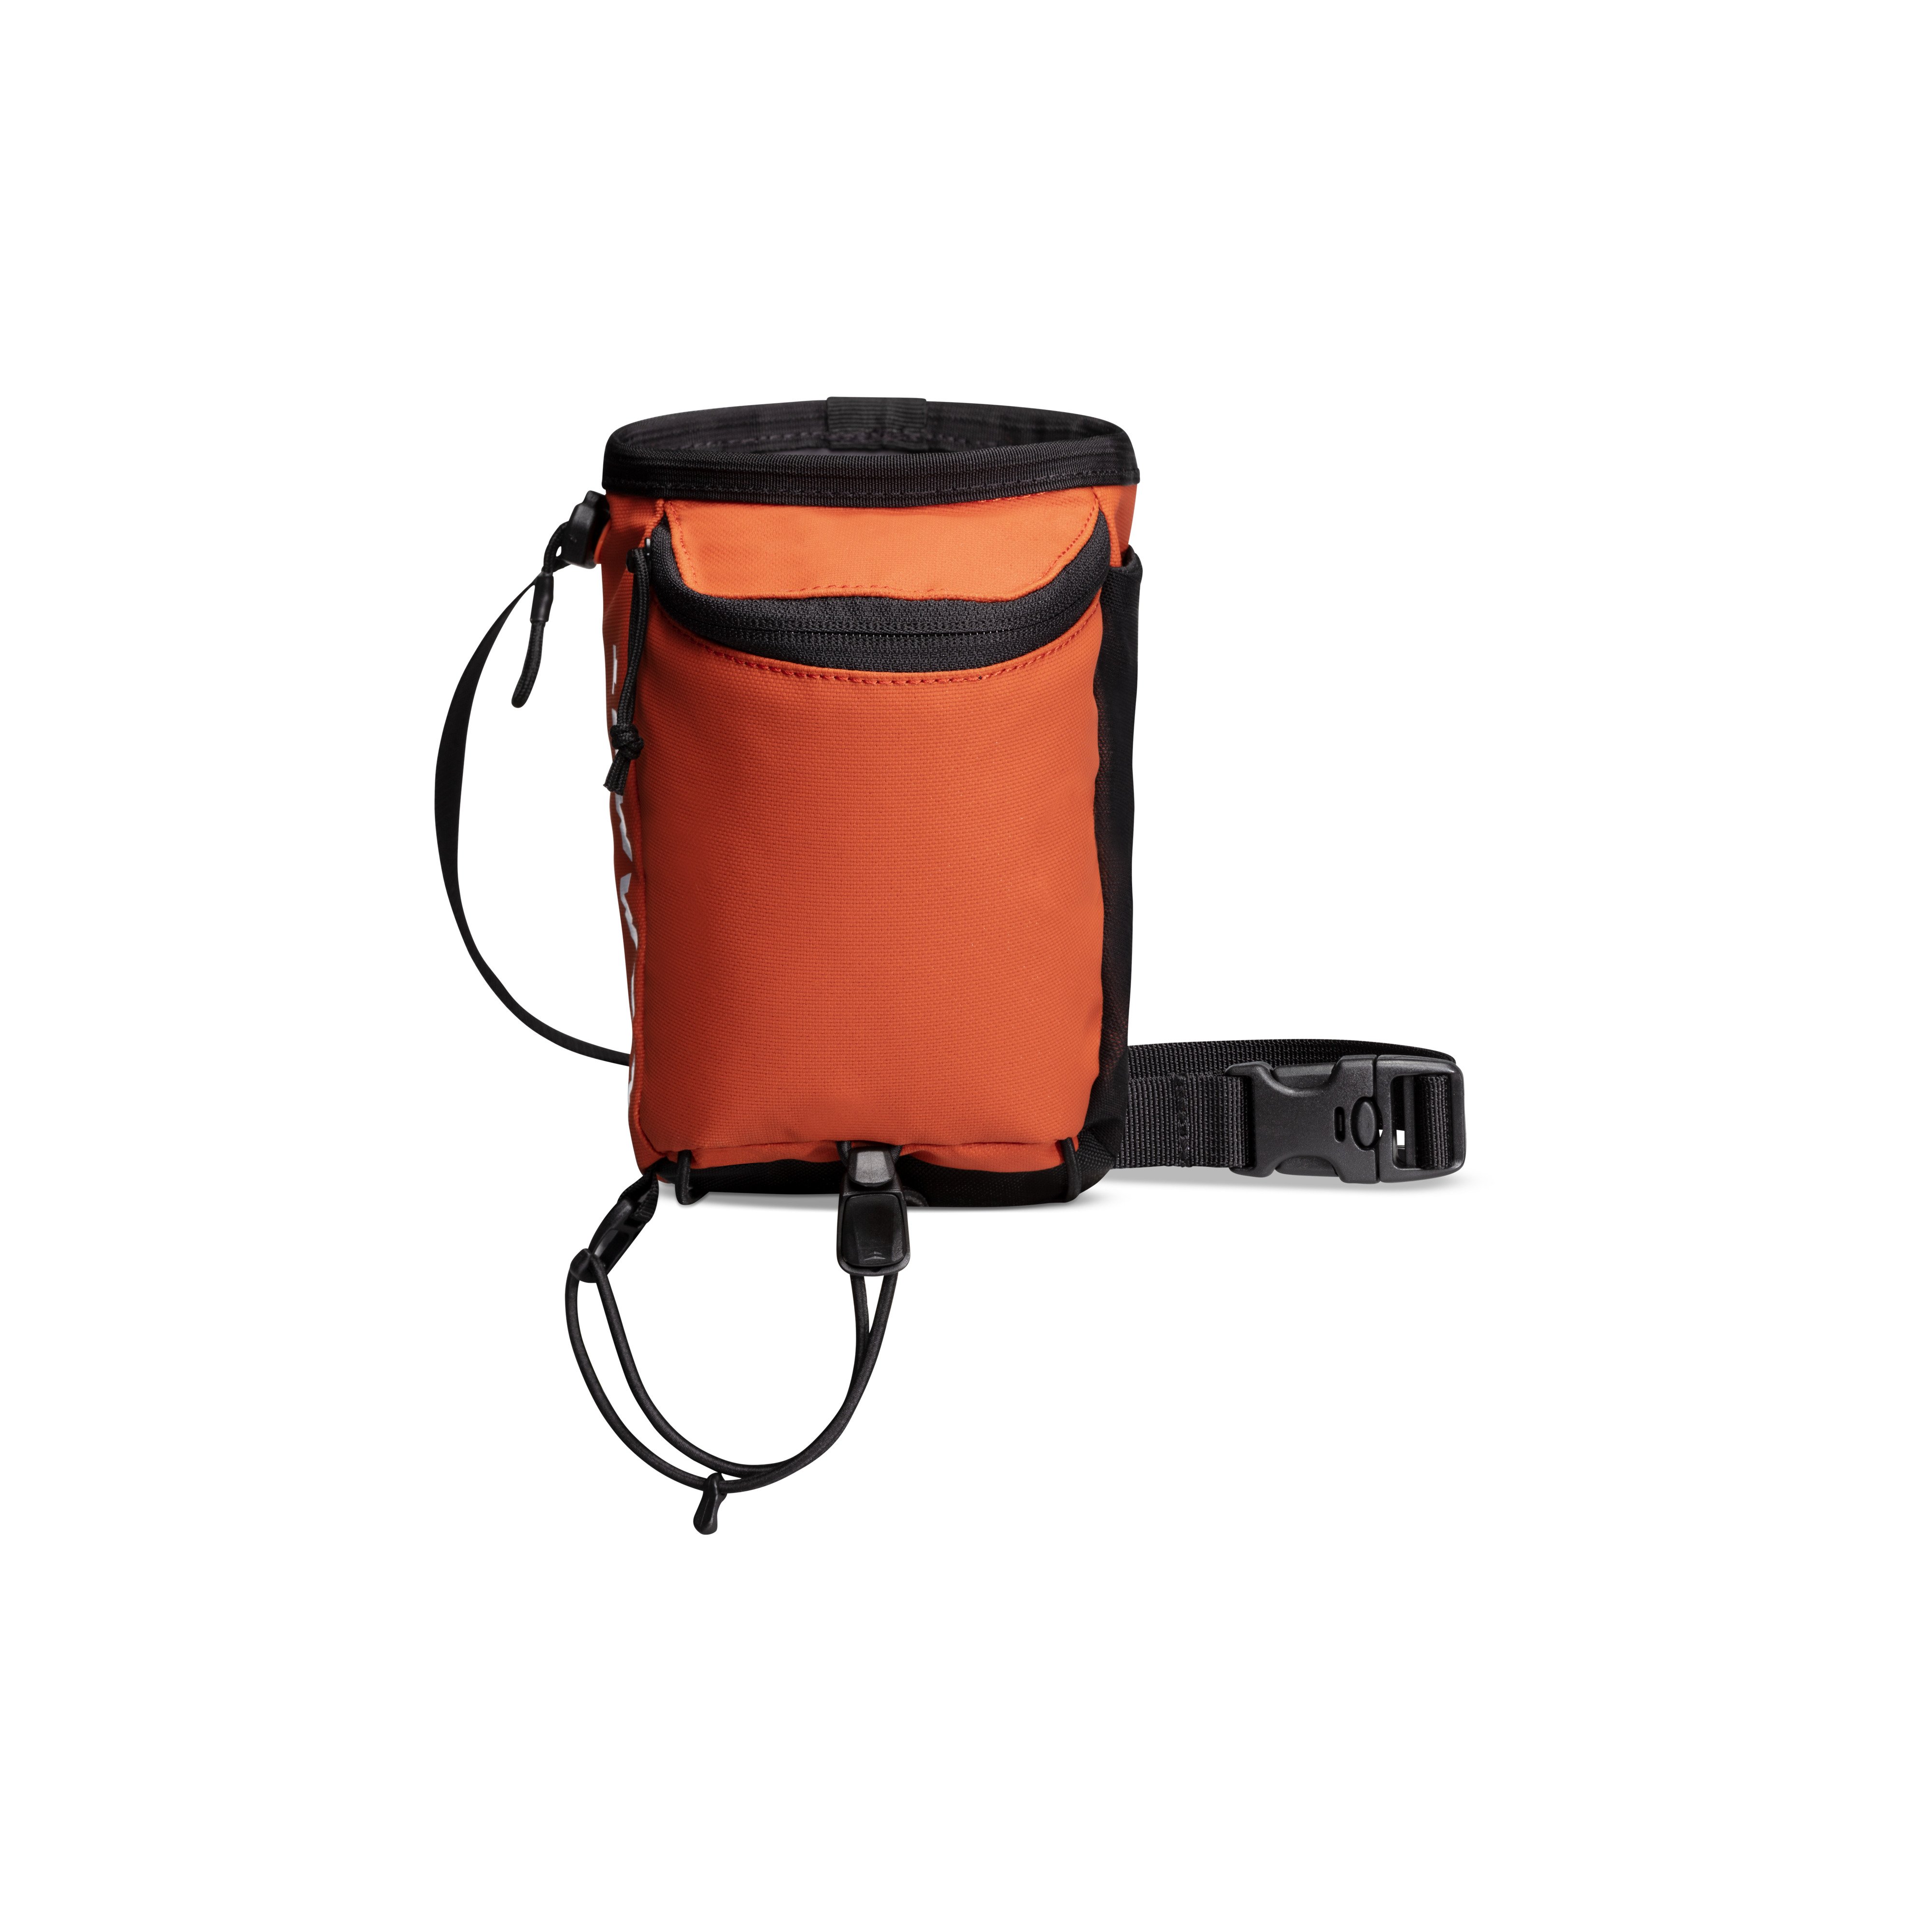 Alpine Chalk Bag - pepper, one size product image